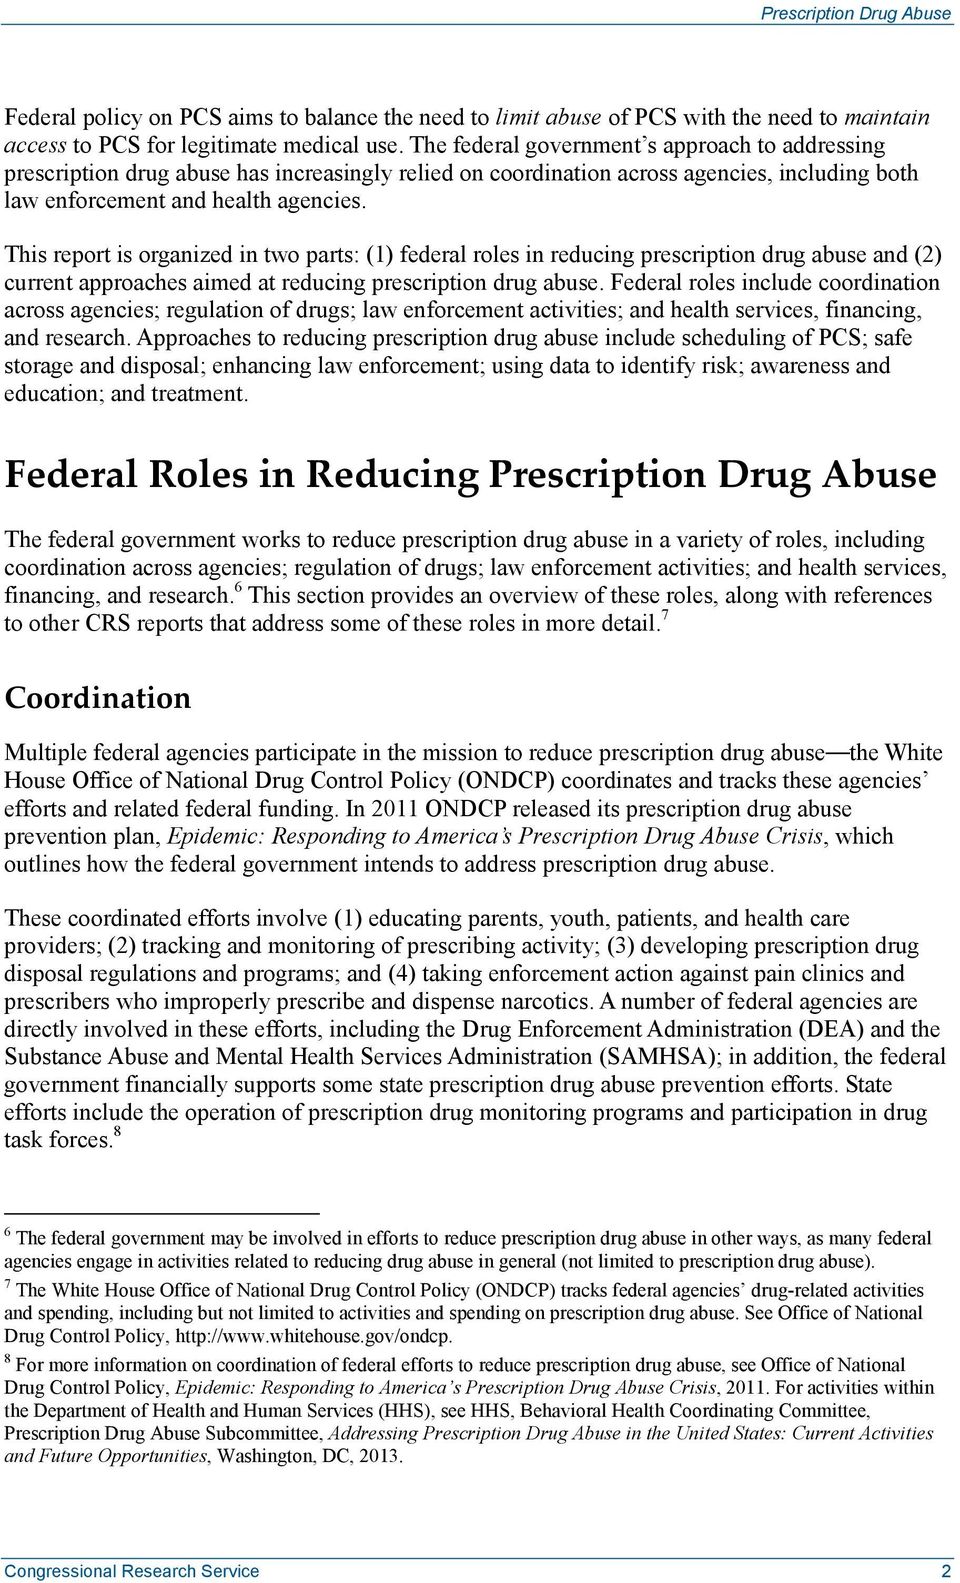 This report is organized in two parts: (1) federal roles in reducing prescription drug abuse and (2) current approaches aimed at reducing prescription drug abuse.